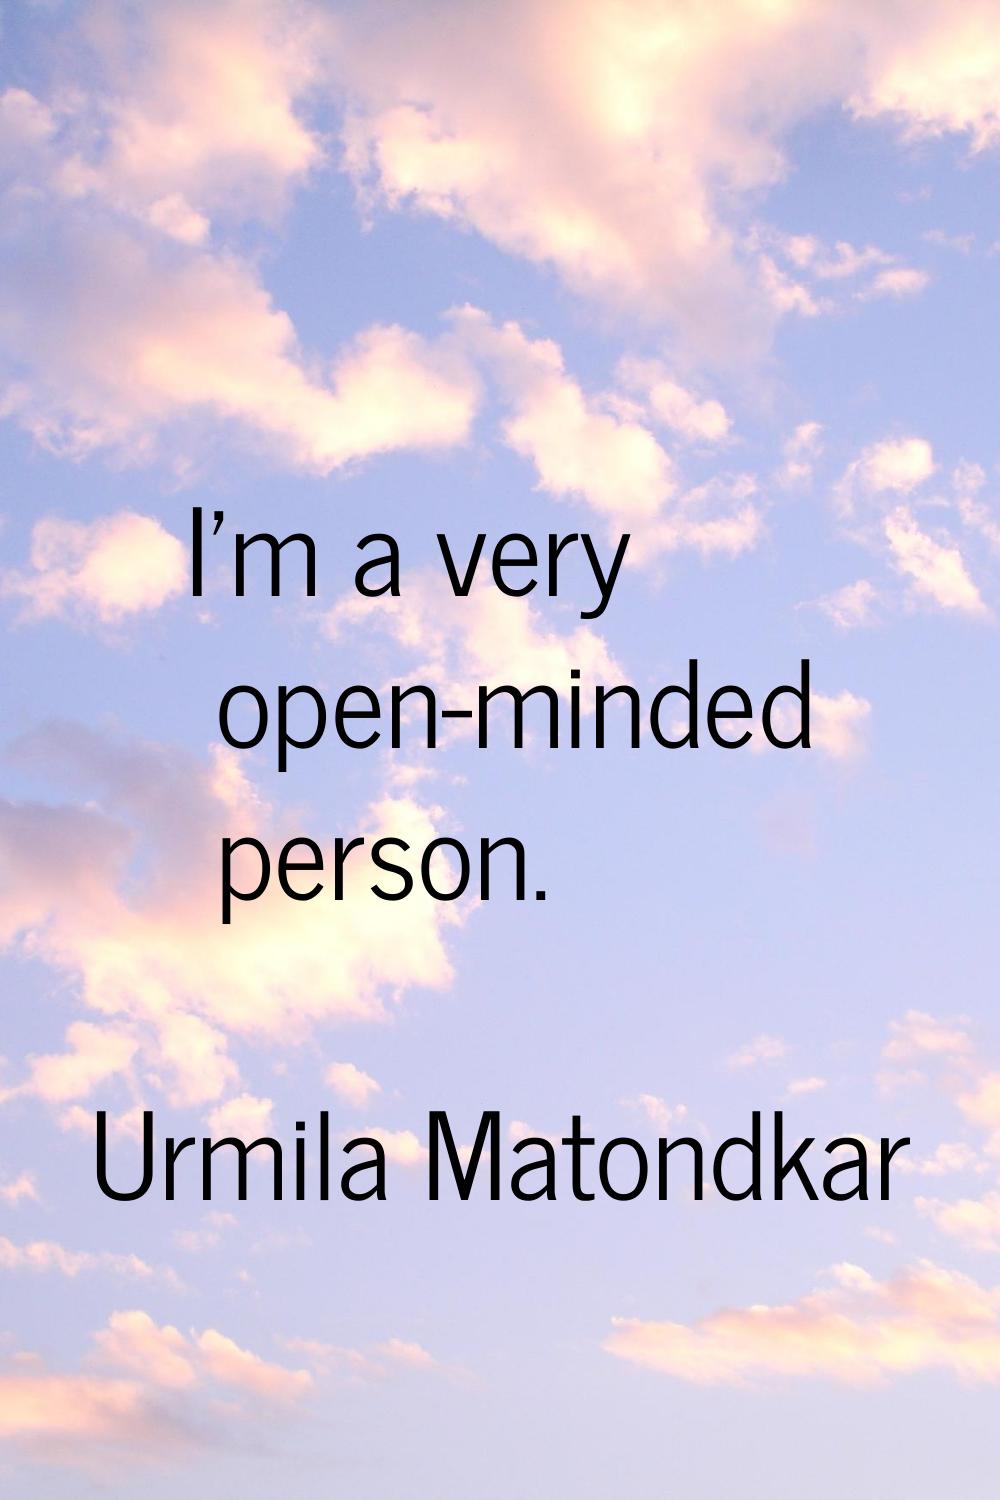 I'm a very open-minded person.